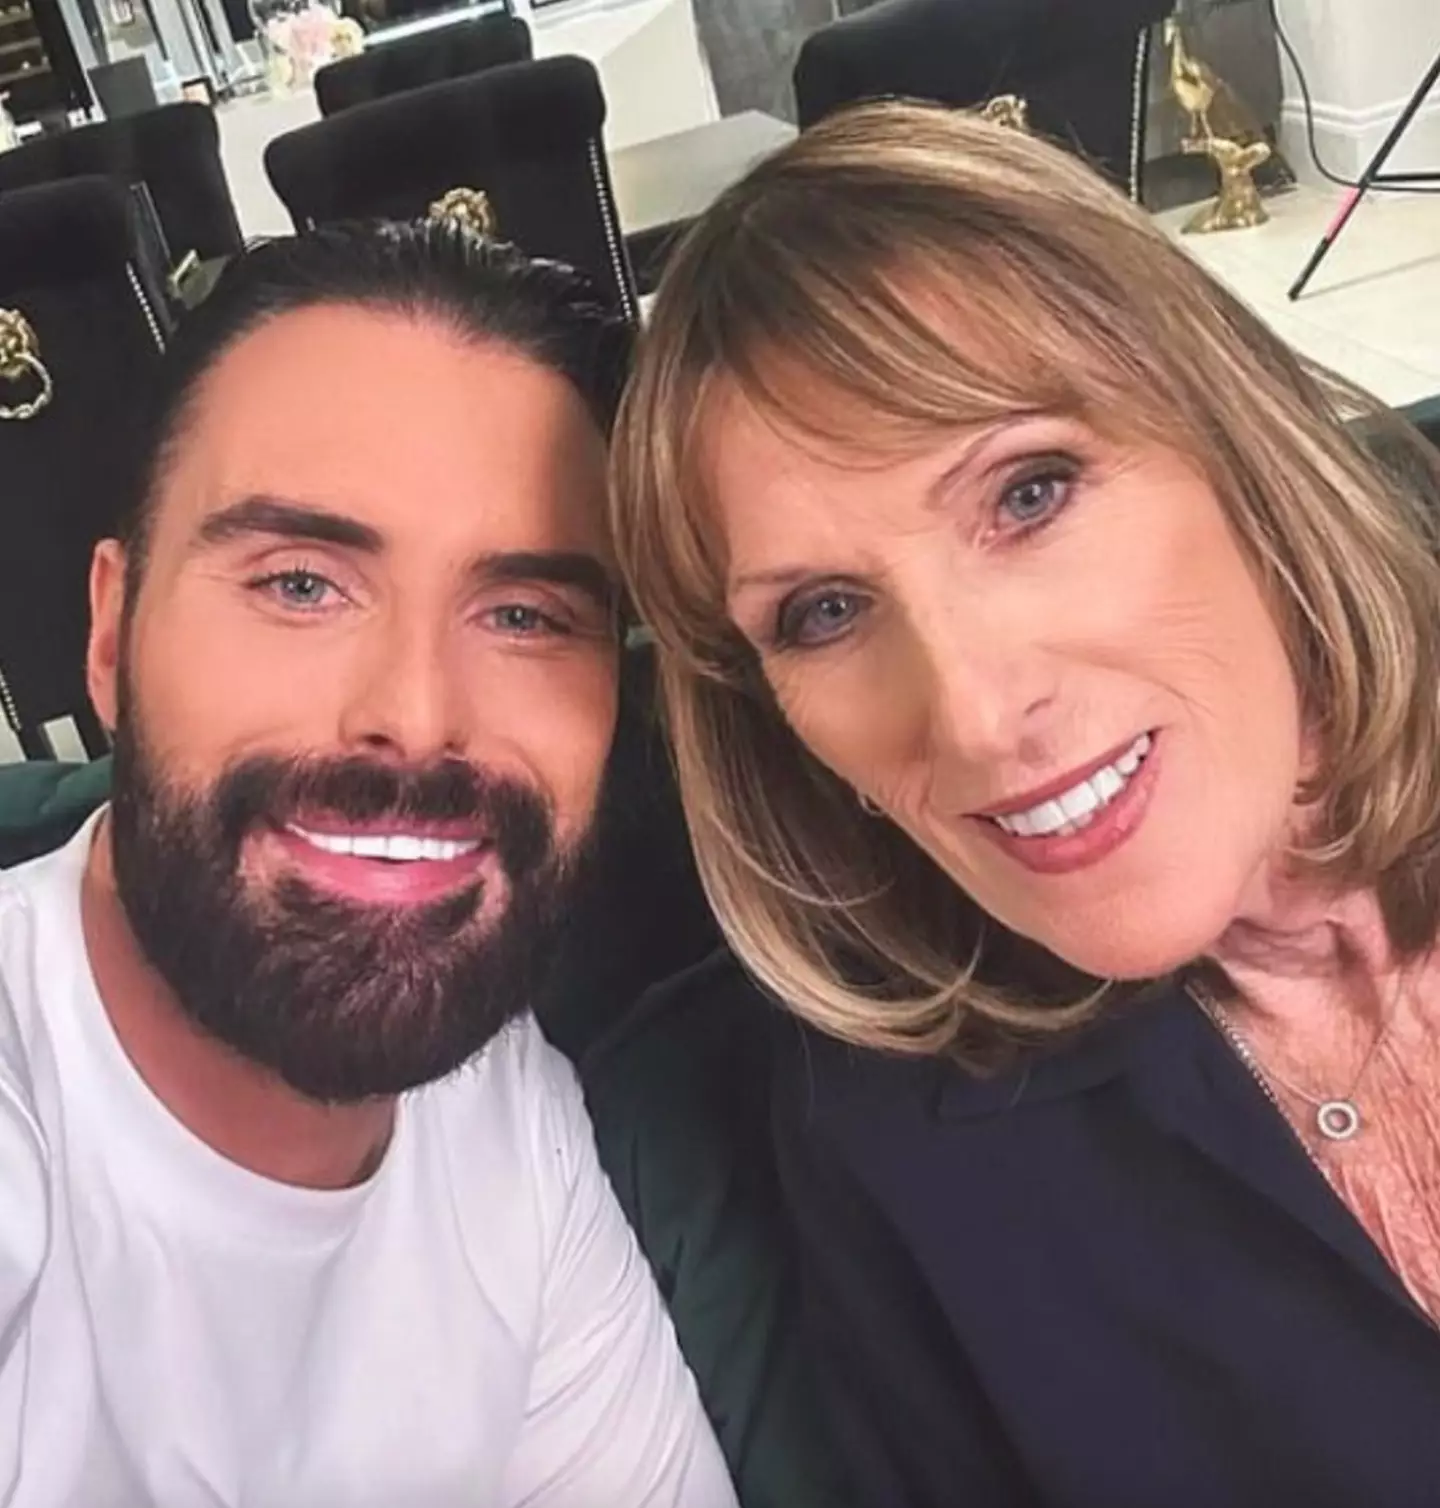 Rylan and his mum are inseparable.